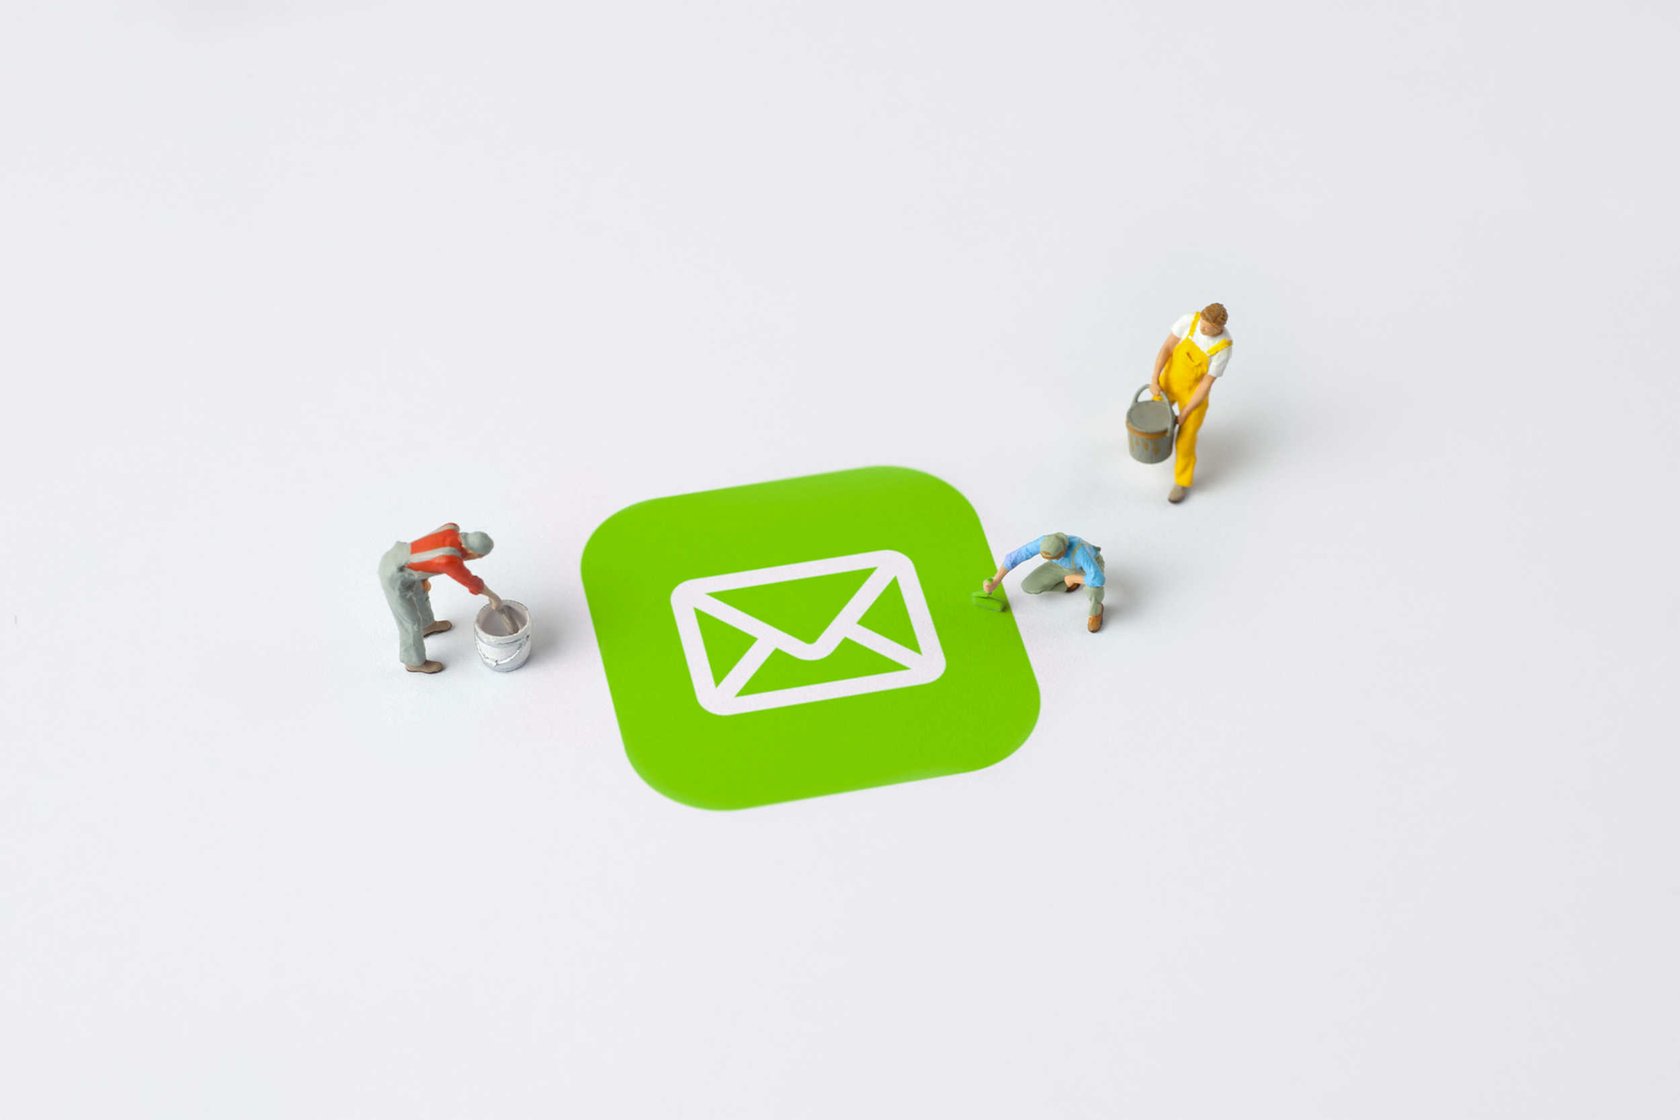 Three workers stand around and paint a green email icon drawn on the floor